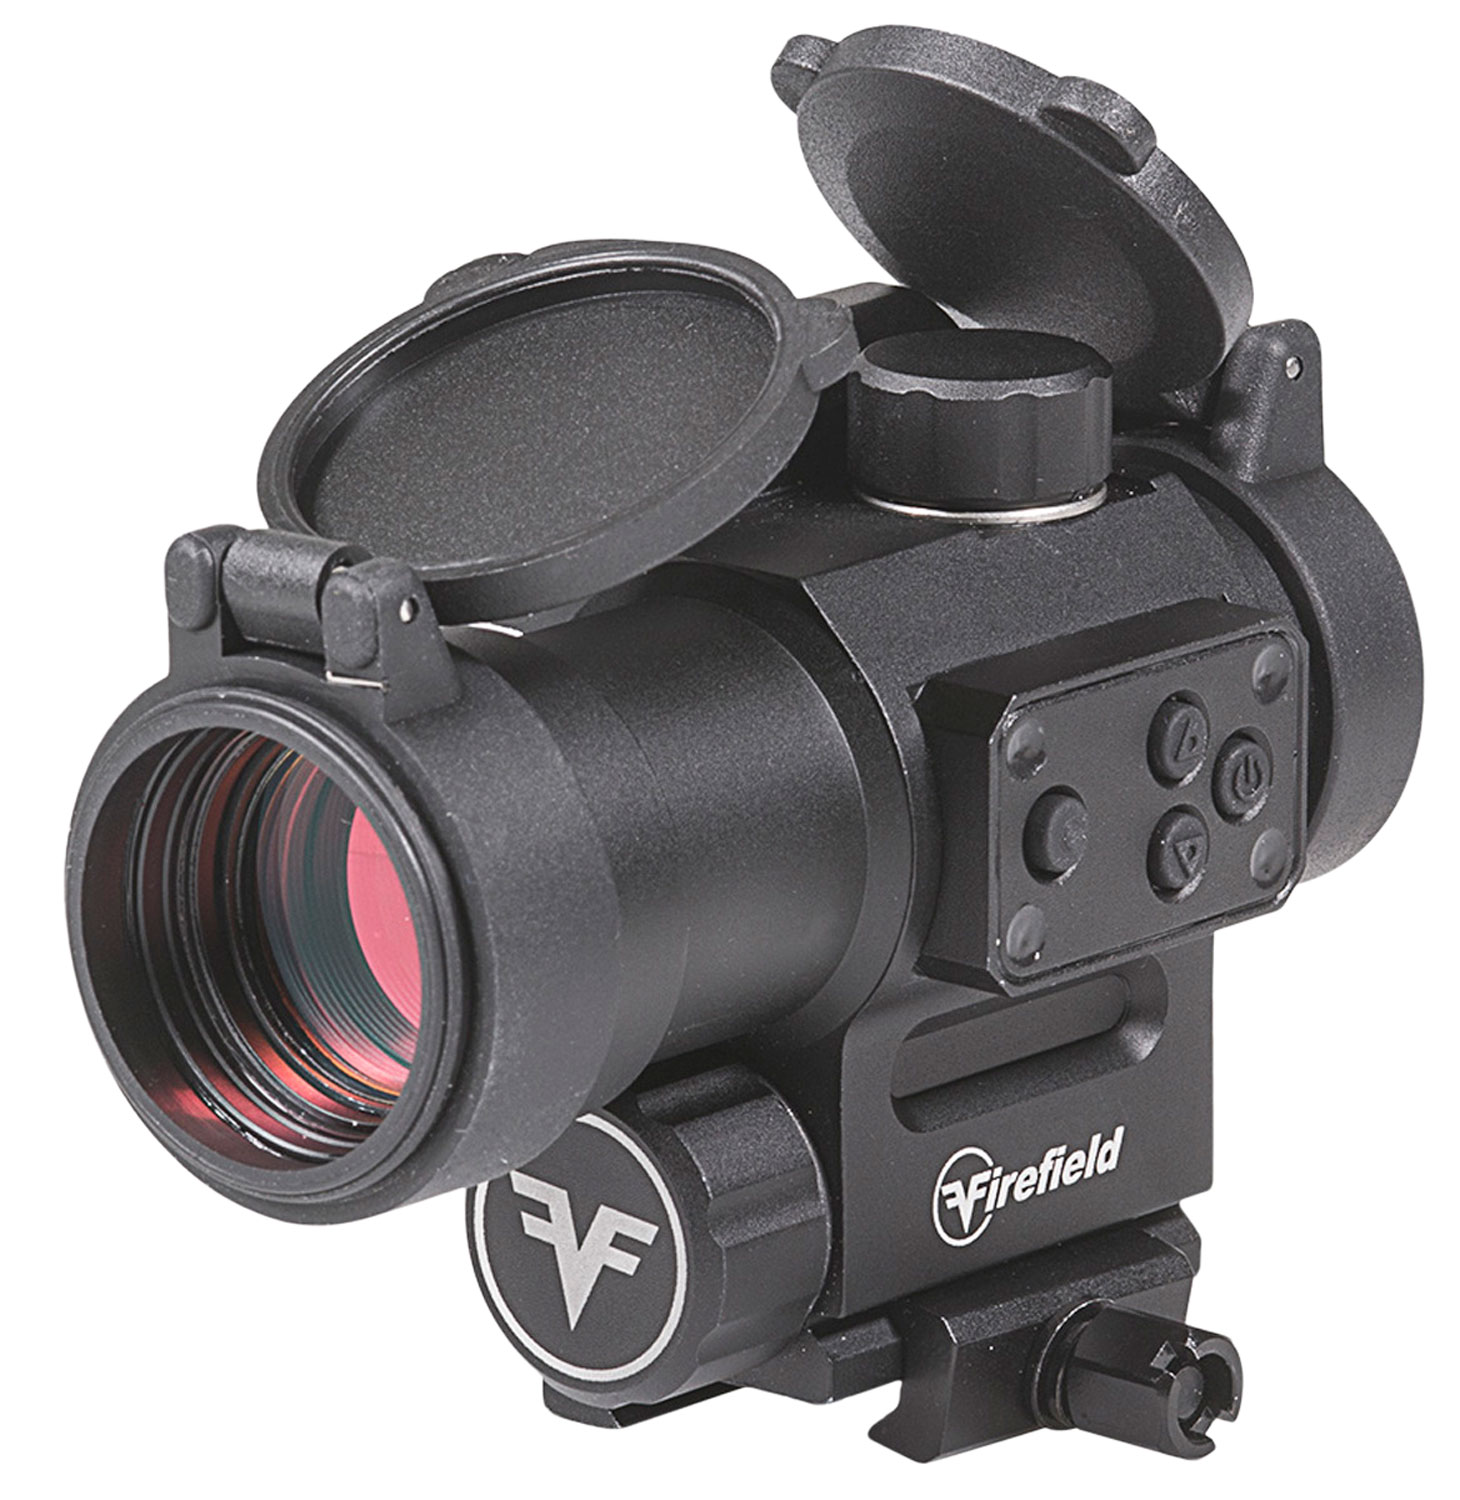 Firefield FF26020 Impulse w/Laser Matte Black 1x 30mm 3 MOA Illuminated Red Dot Reticle Features Red Laser